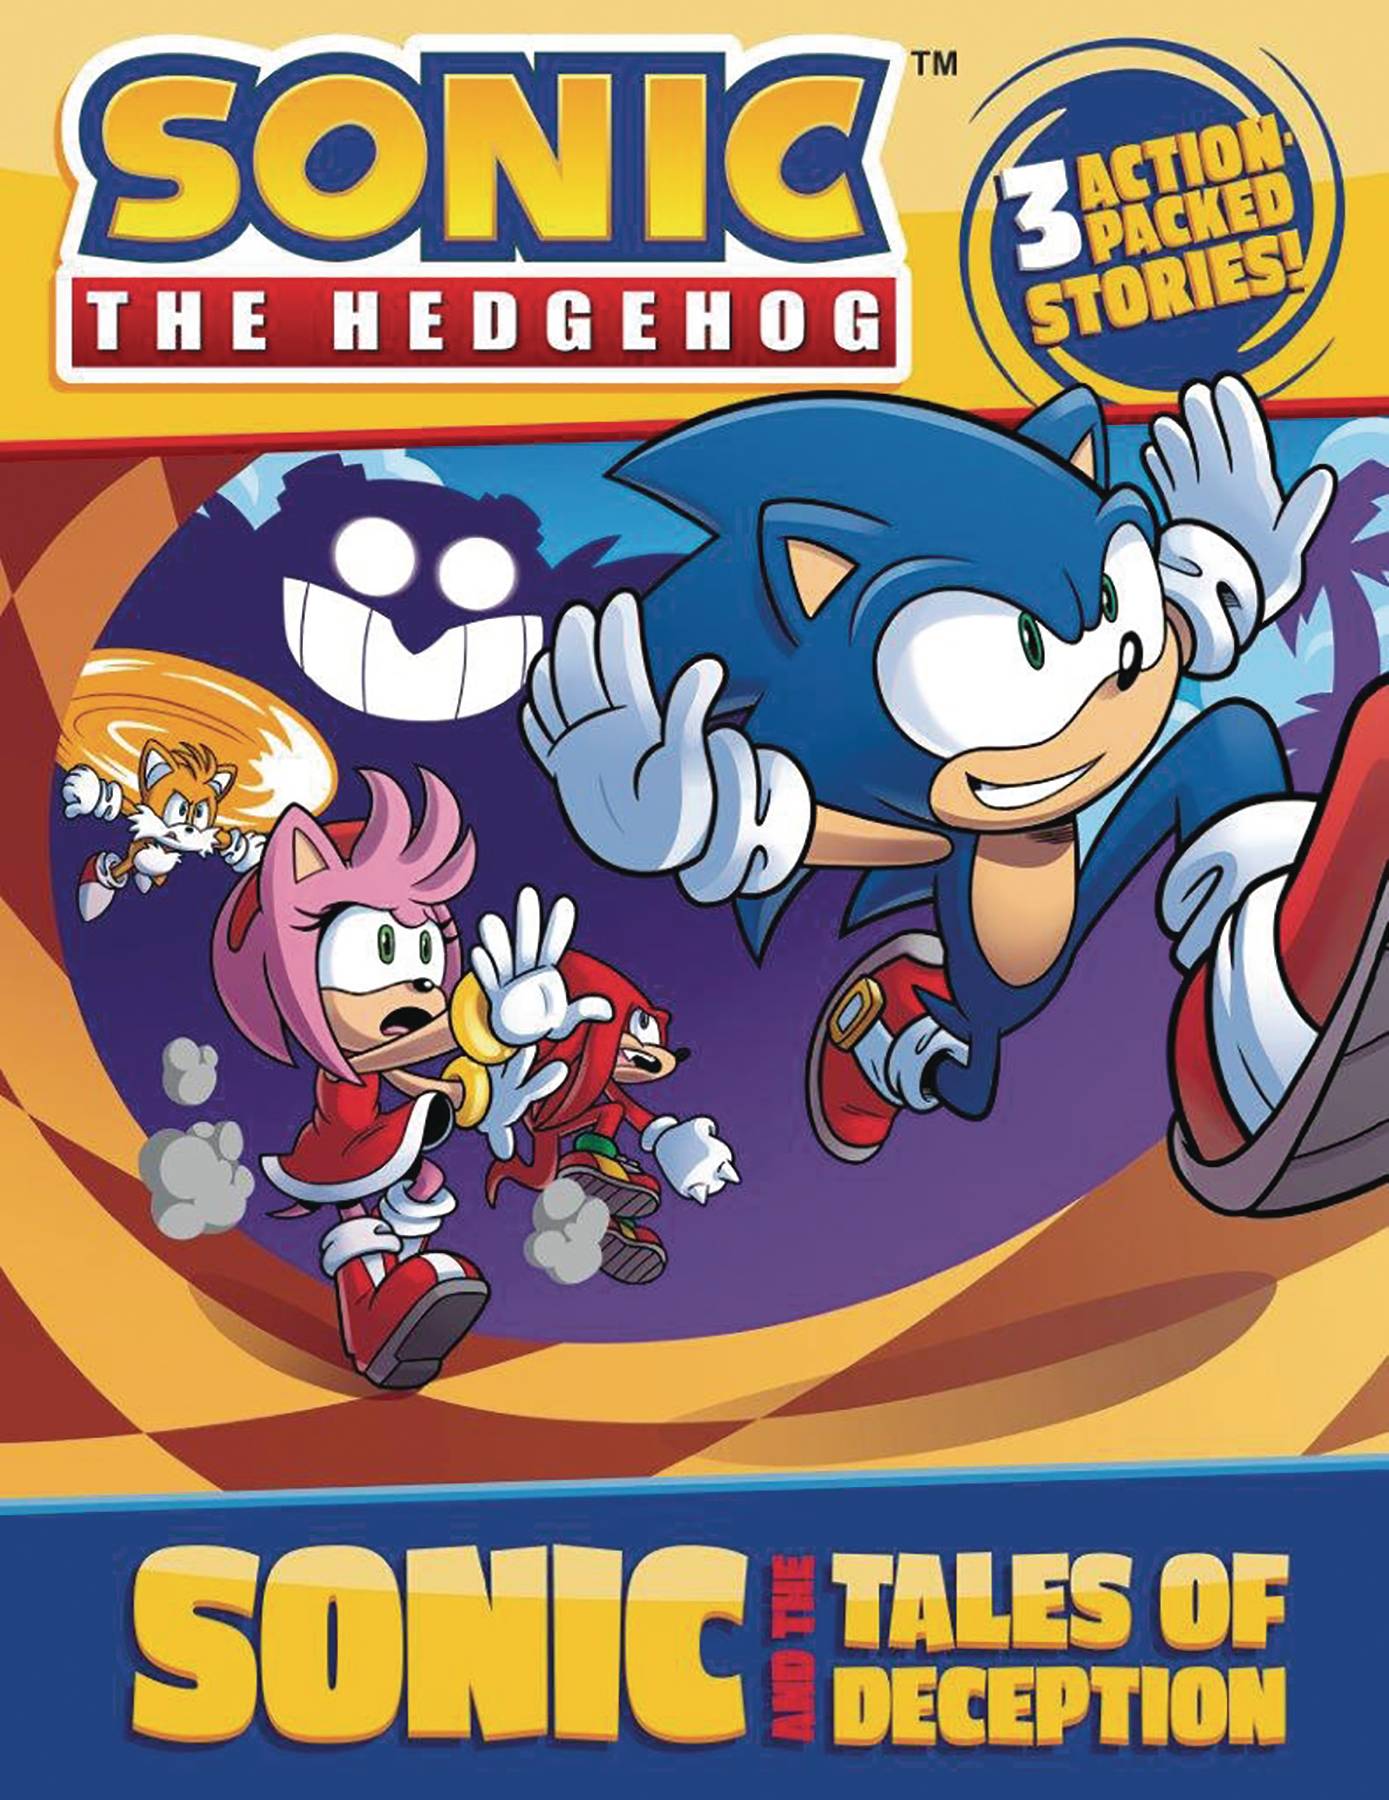 Sonic & Tales of Deception Soft Cover